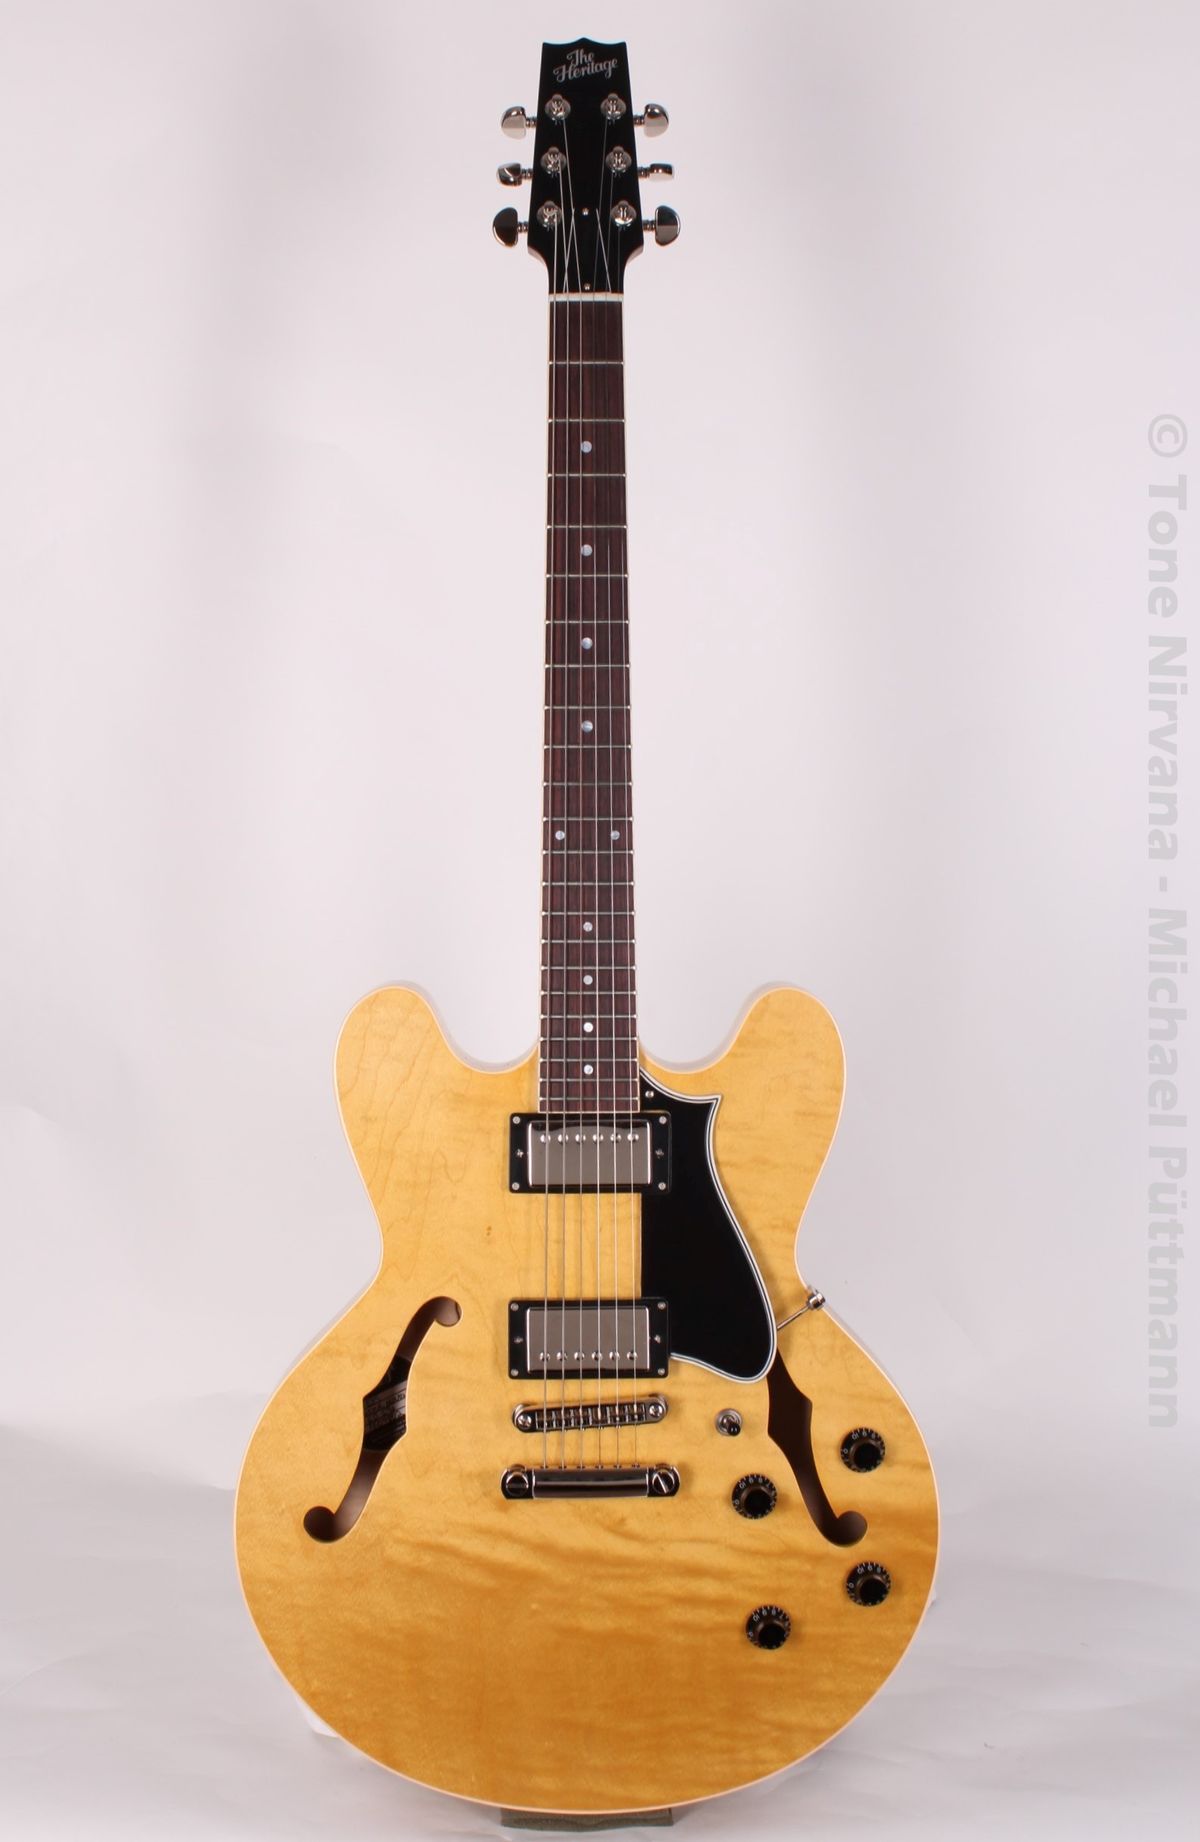 The Heritage H-535 Std. Antique Natural